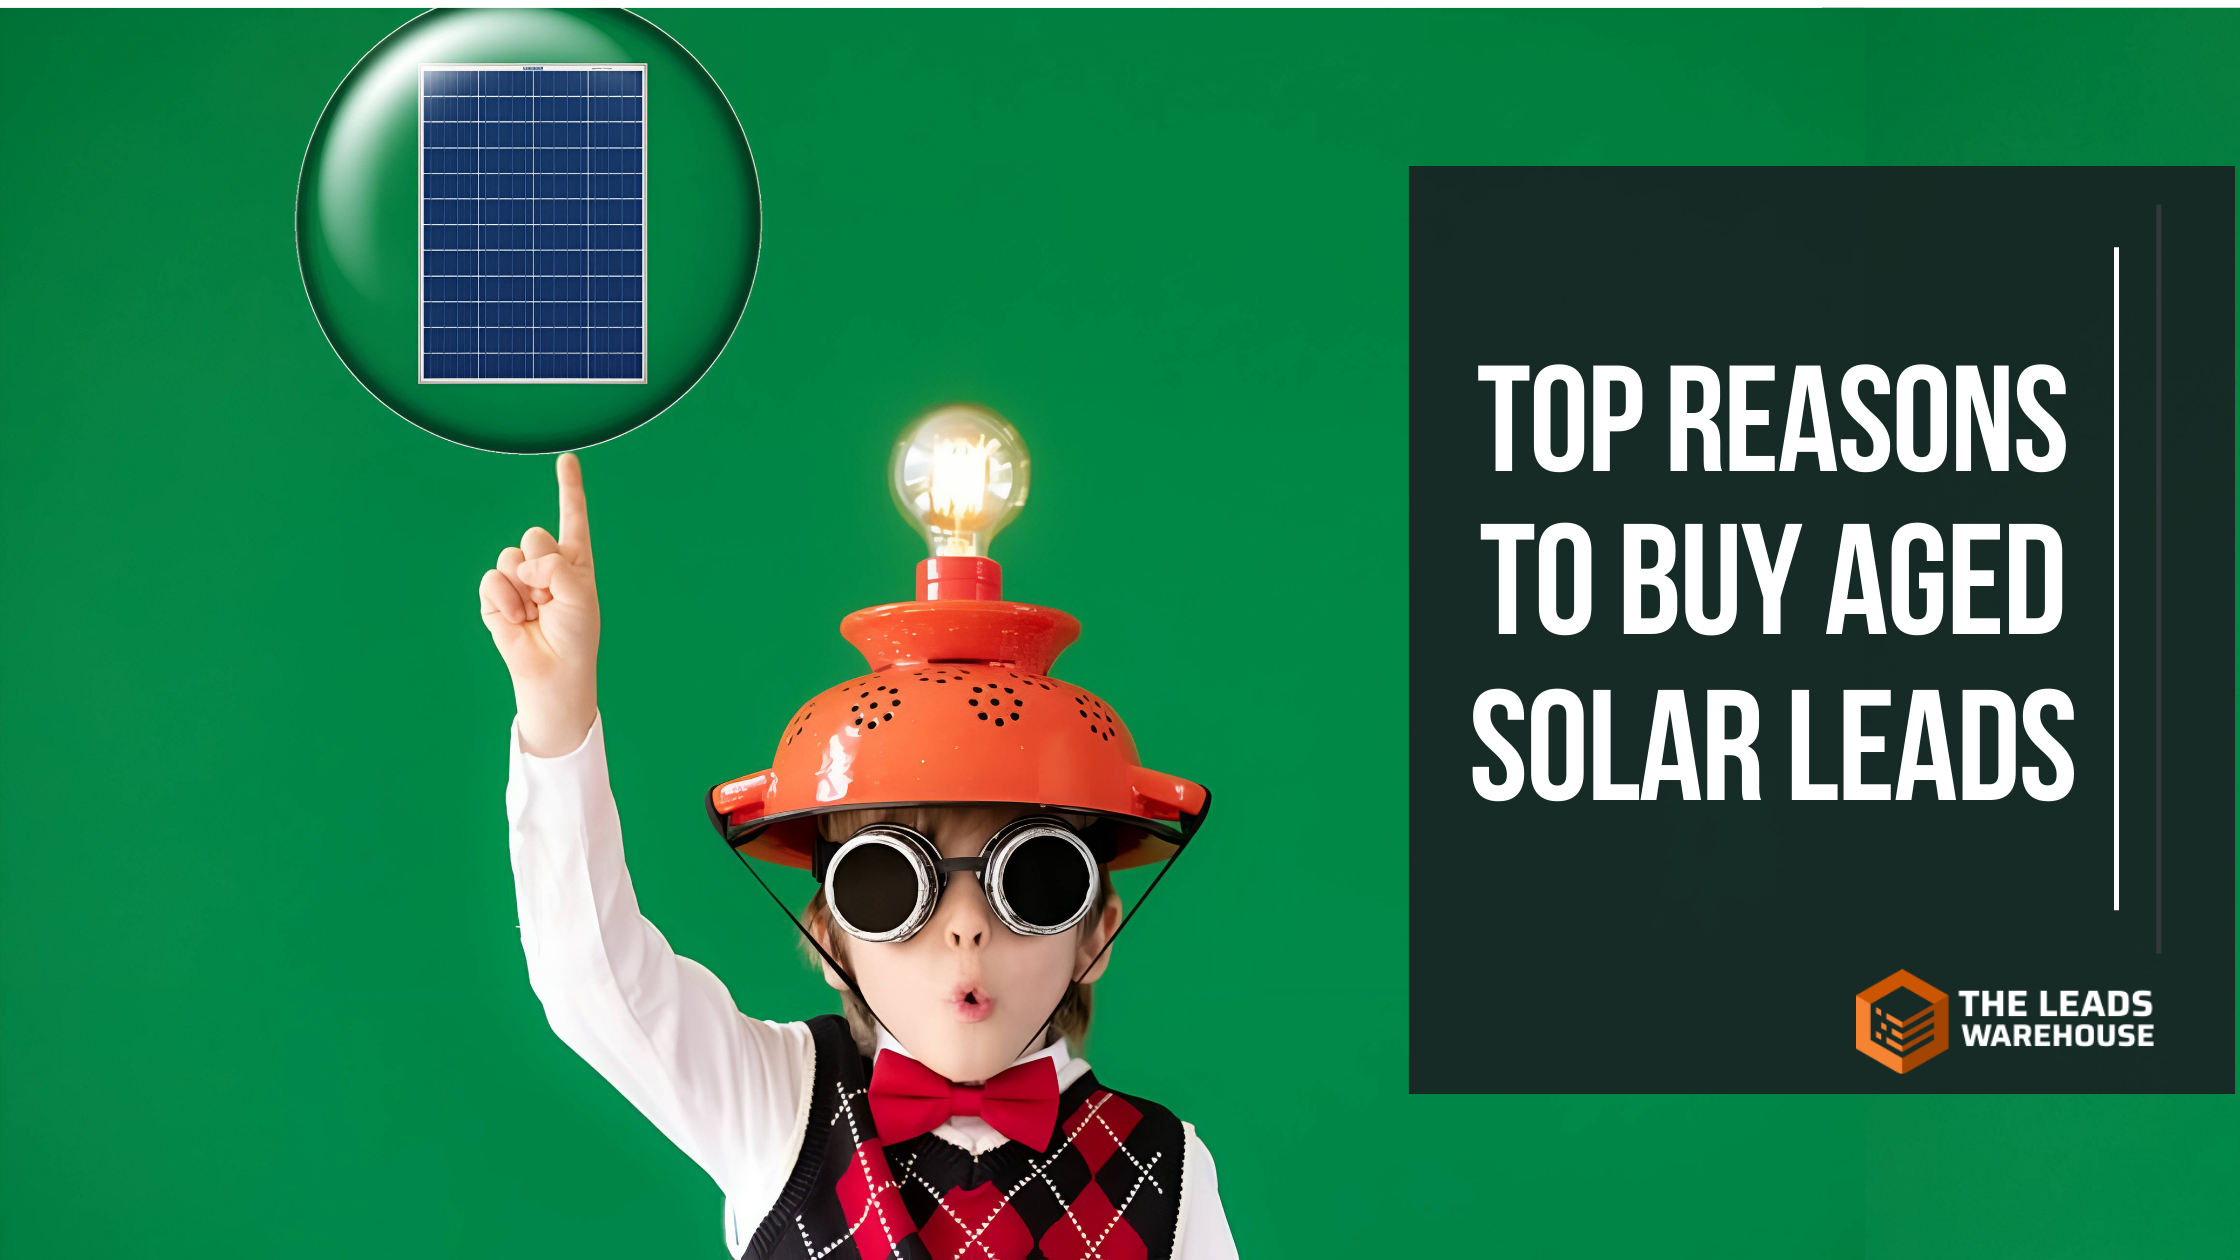 Buying Aged Solar Leads | Top Reasons